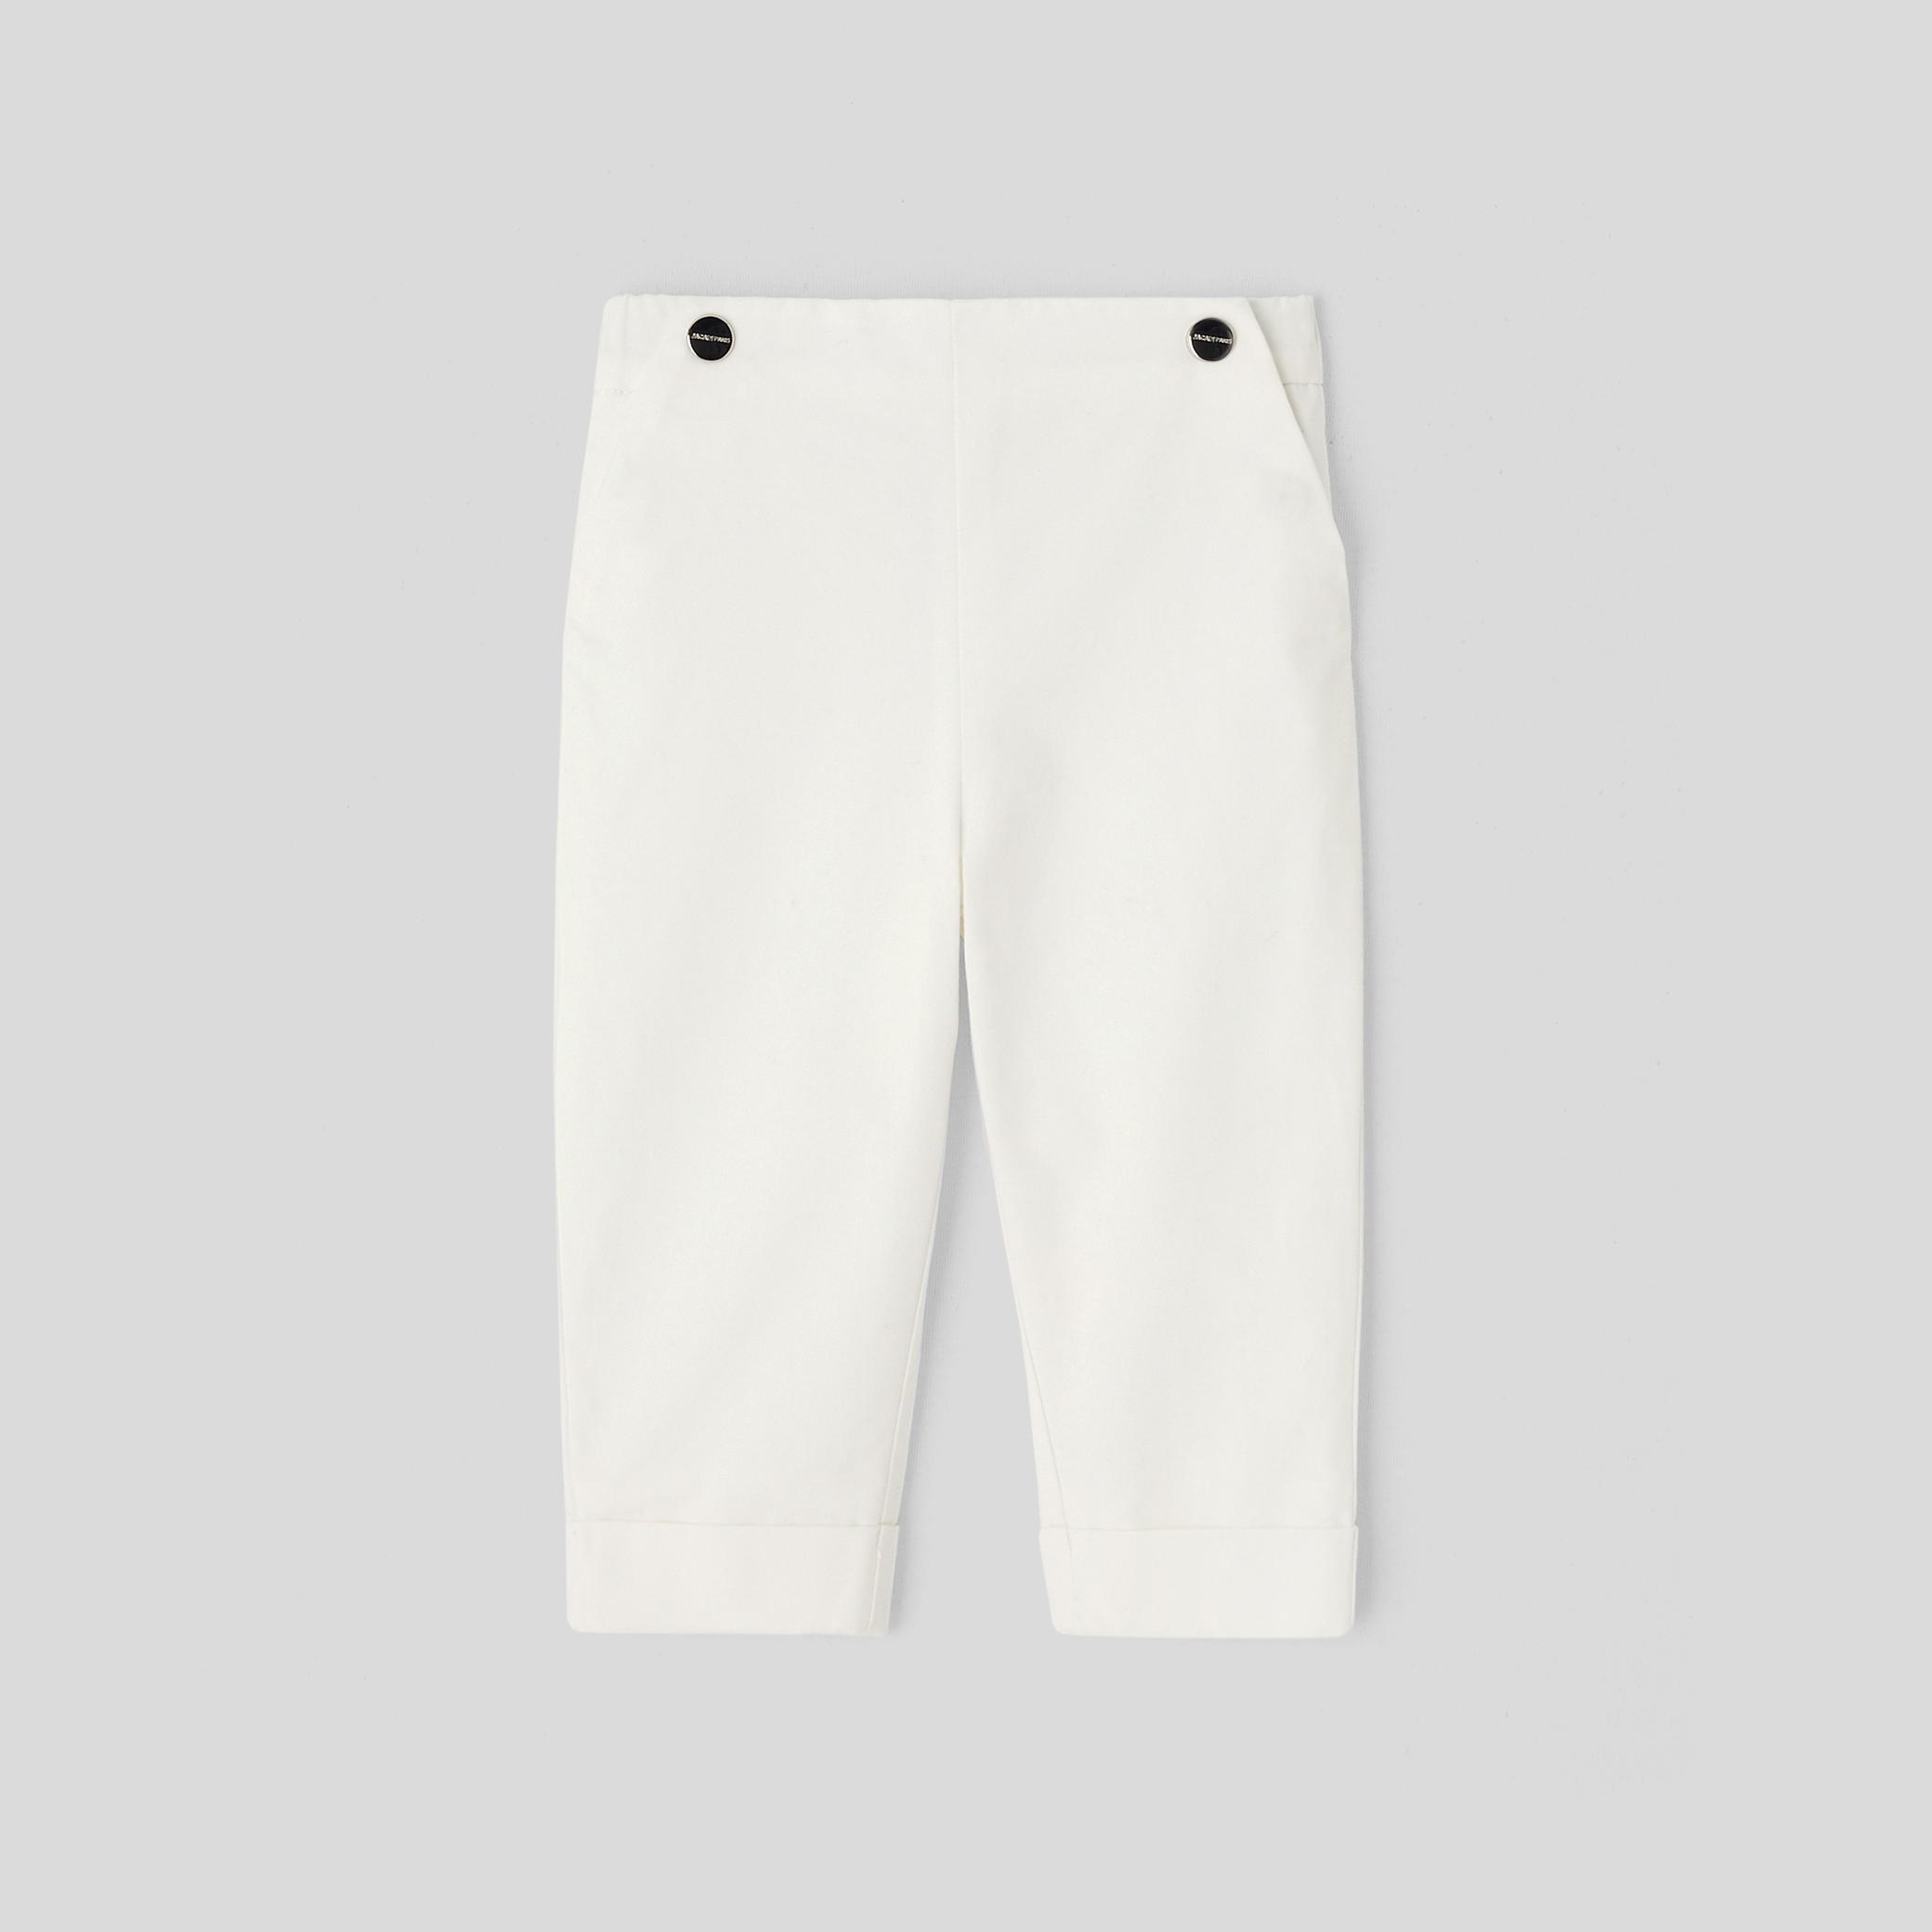 Baby boy pants for special occasions